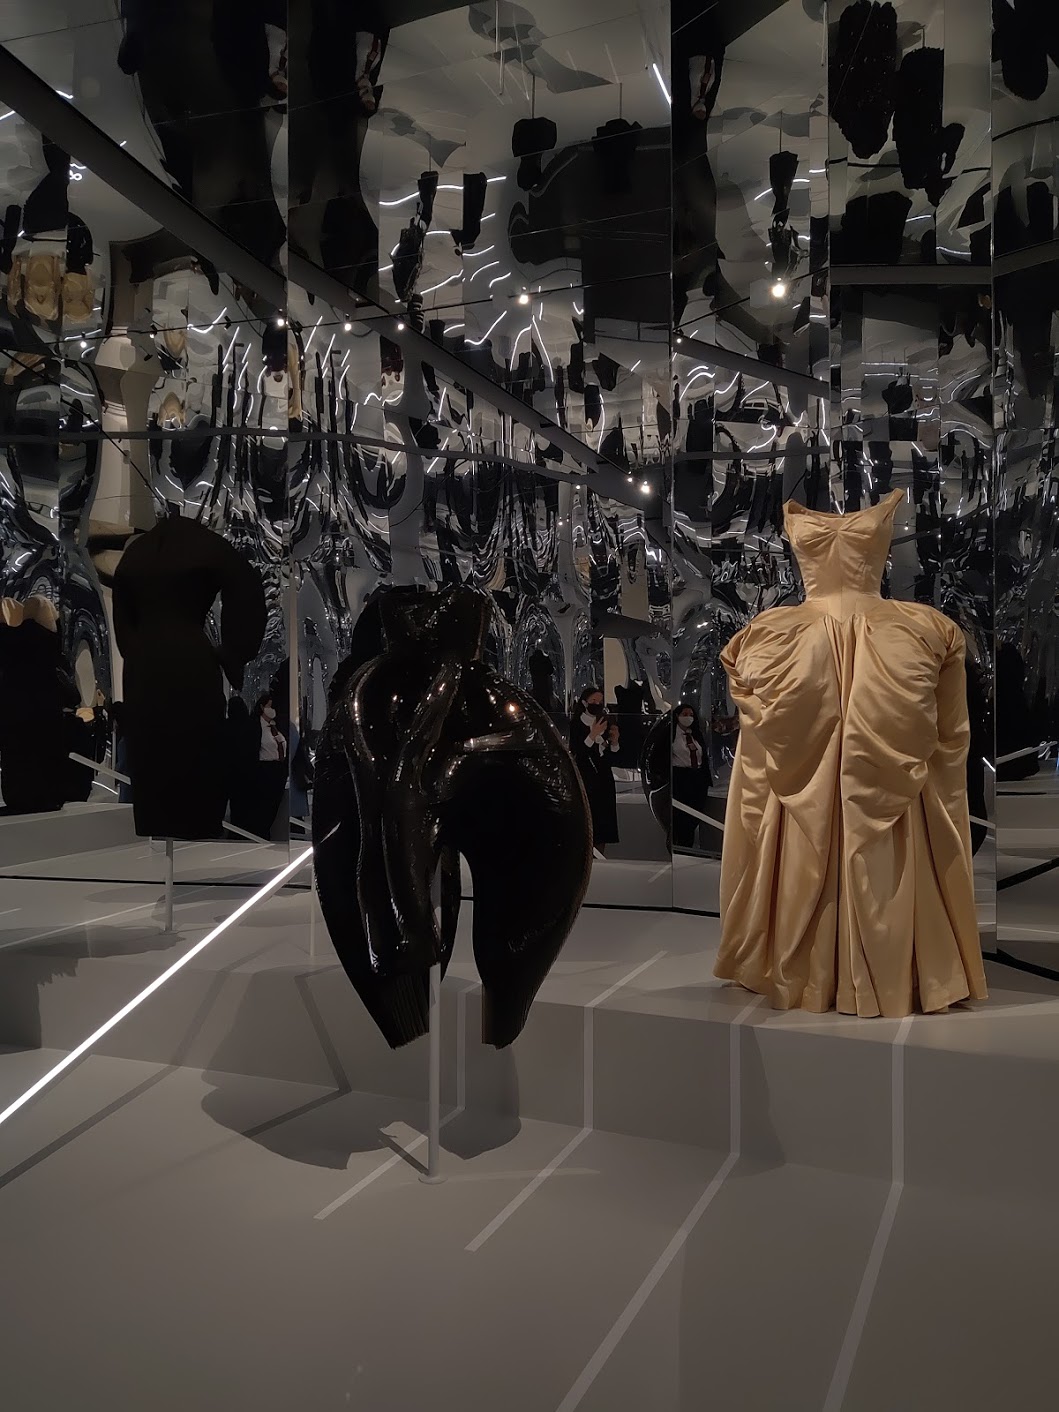 About Time: Inside the 2020 Met Costume Insitute Exhibit